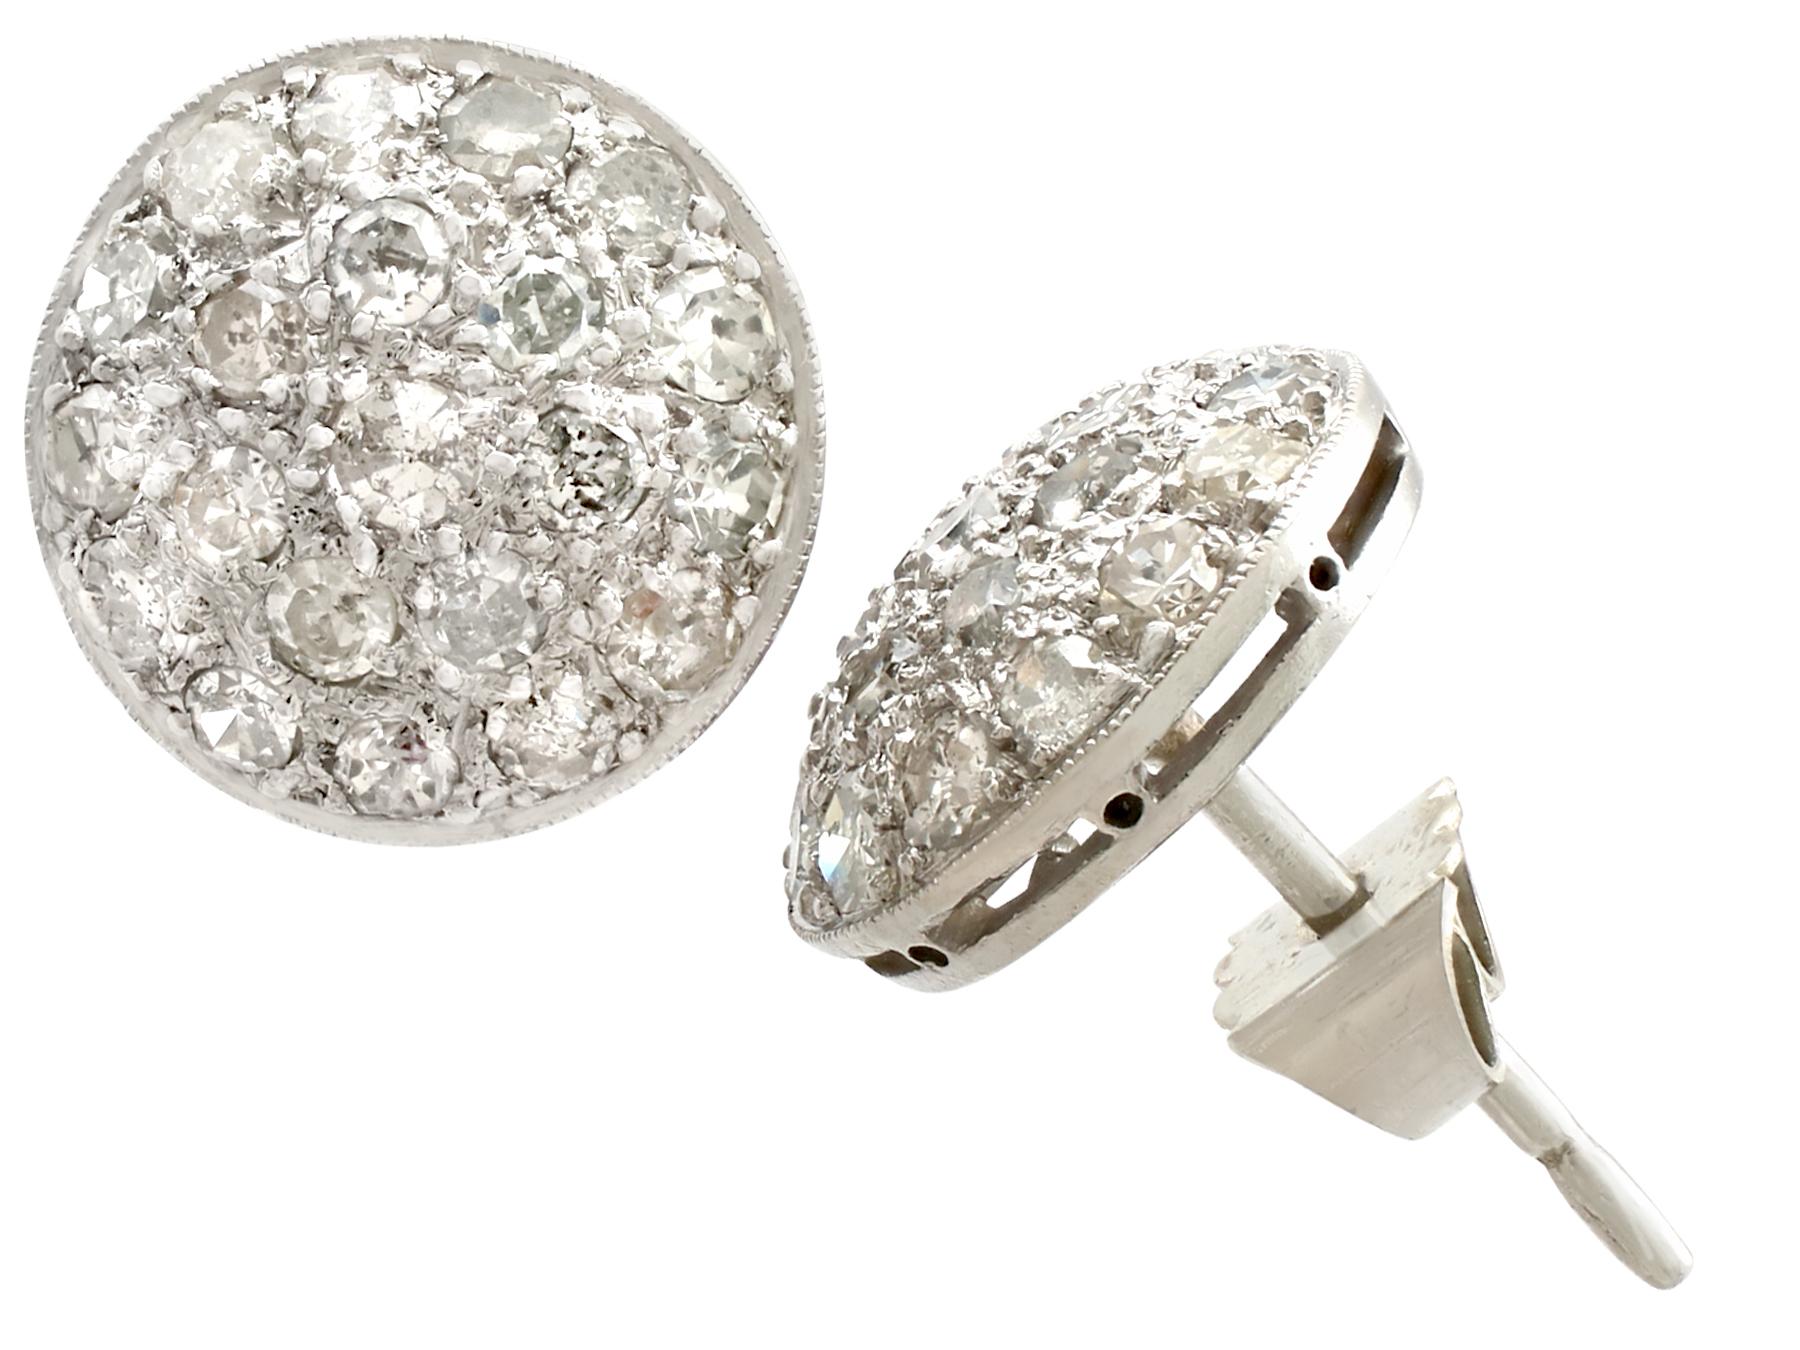 An impressive pair of antique 0.78 carat diamond and platinum stud style earrings; part of our diverse antique jewelry and estate jewelry collections.

These fine and impressive antique platinum and diamond stud earrings are each embellished with